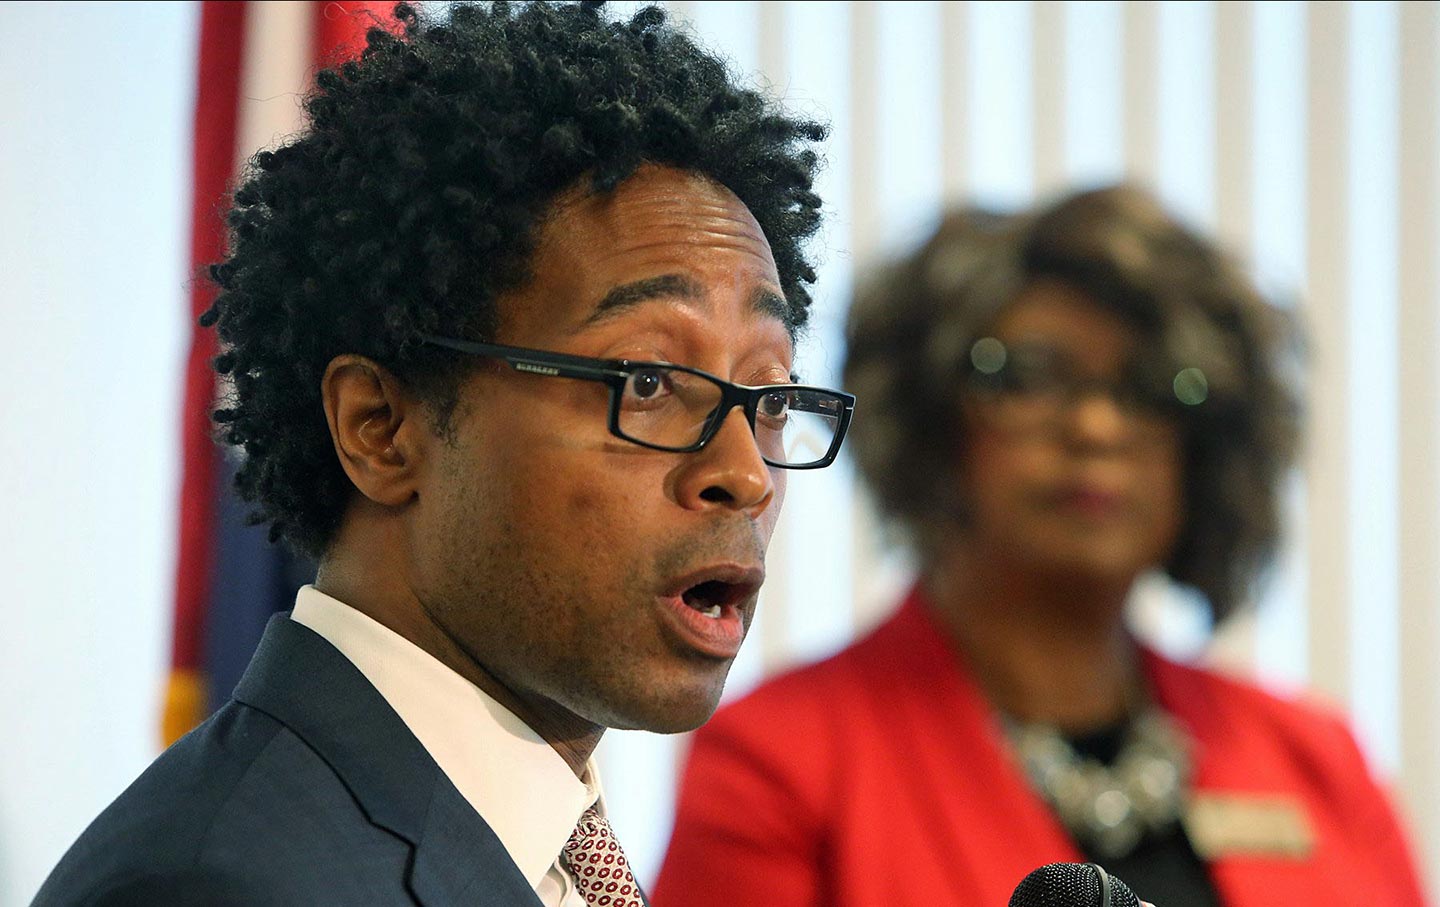 Wesley Bell St. Louis Prosecutor Candidate